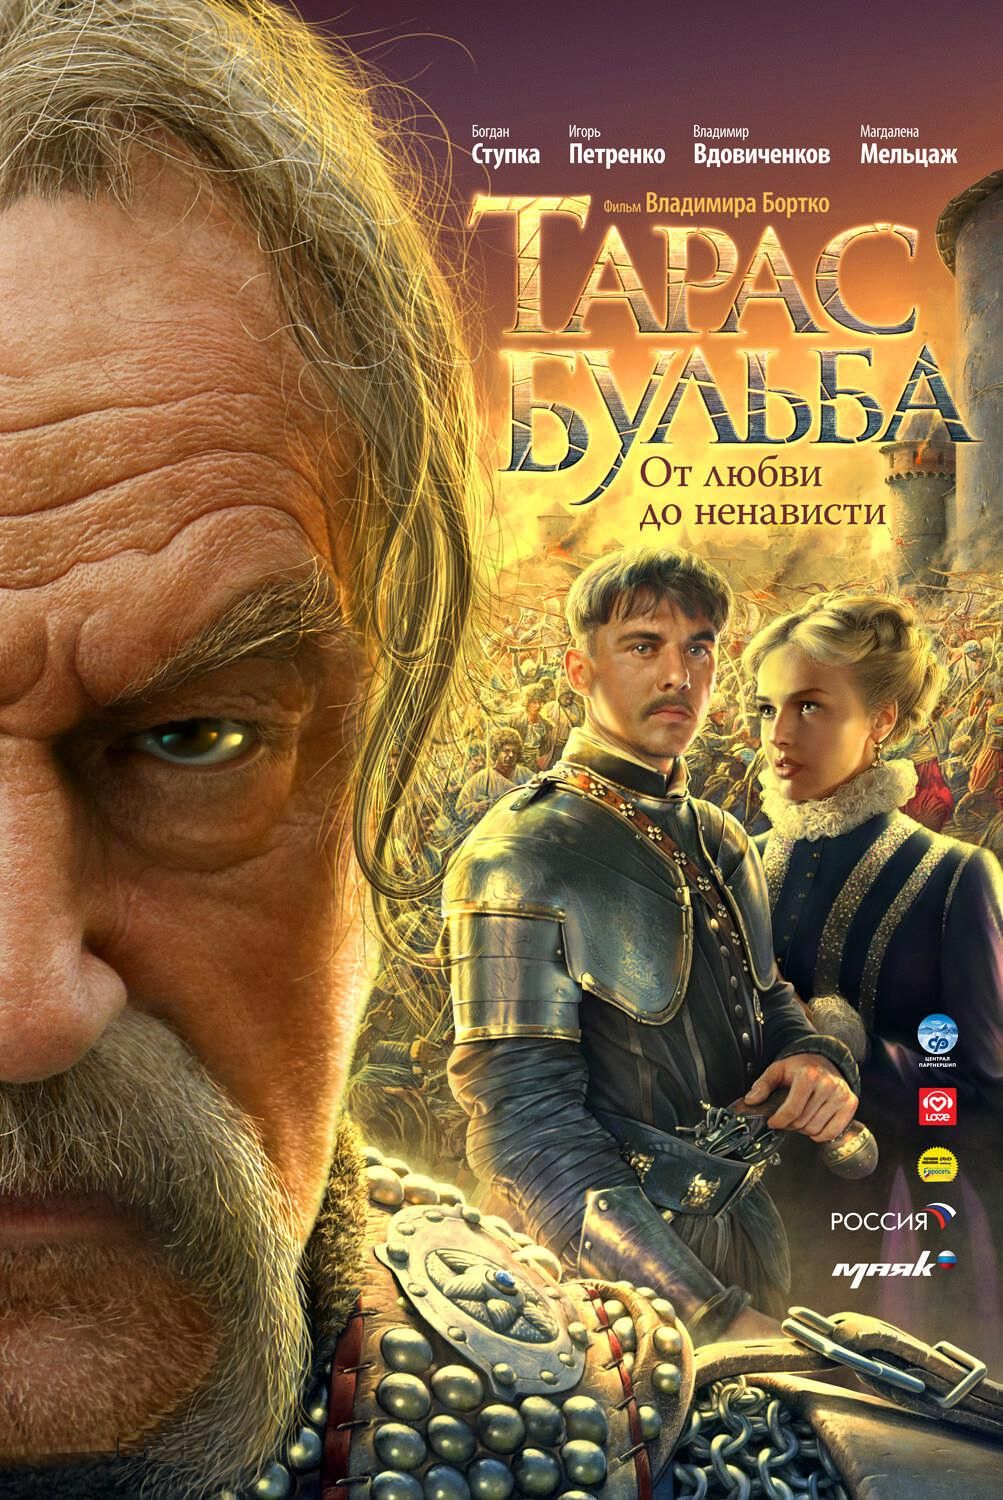 Extra Large Movie Poster Image for Taras bulba (#2 of 2)